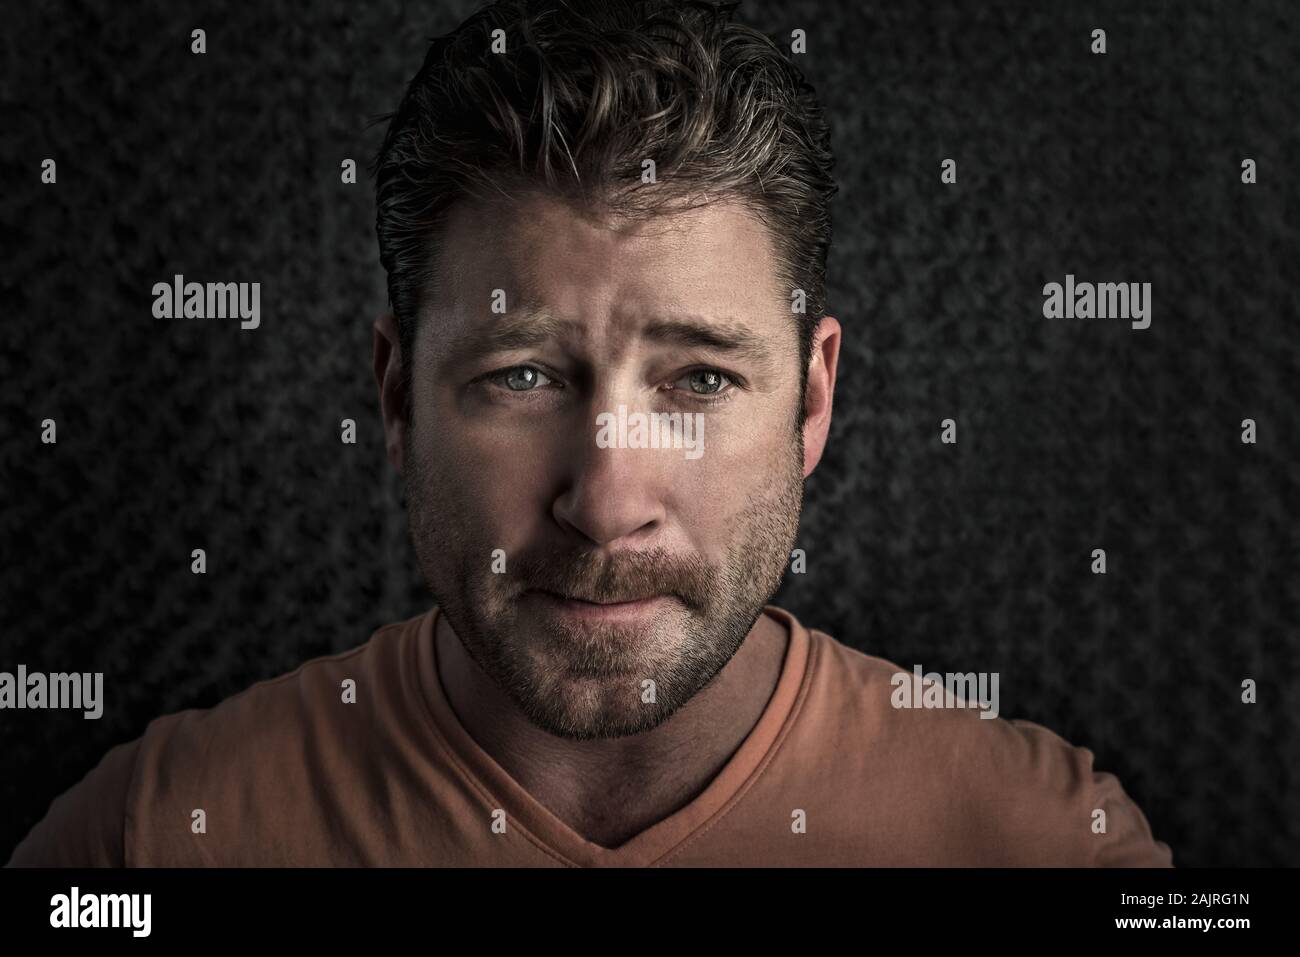 pensive, worried, male portrait on seamless background Stock Photo